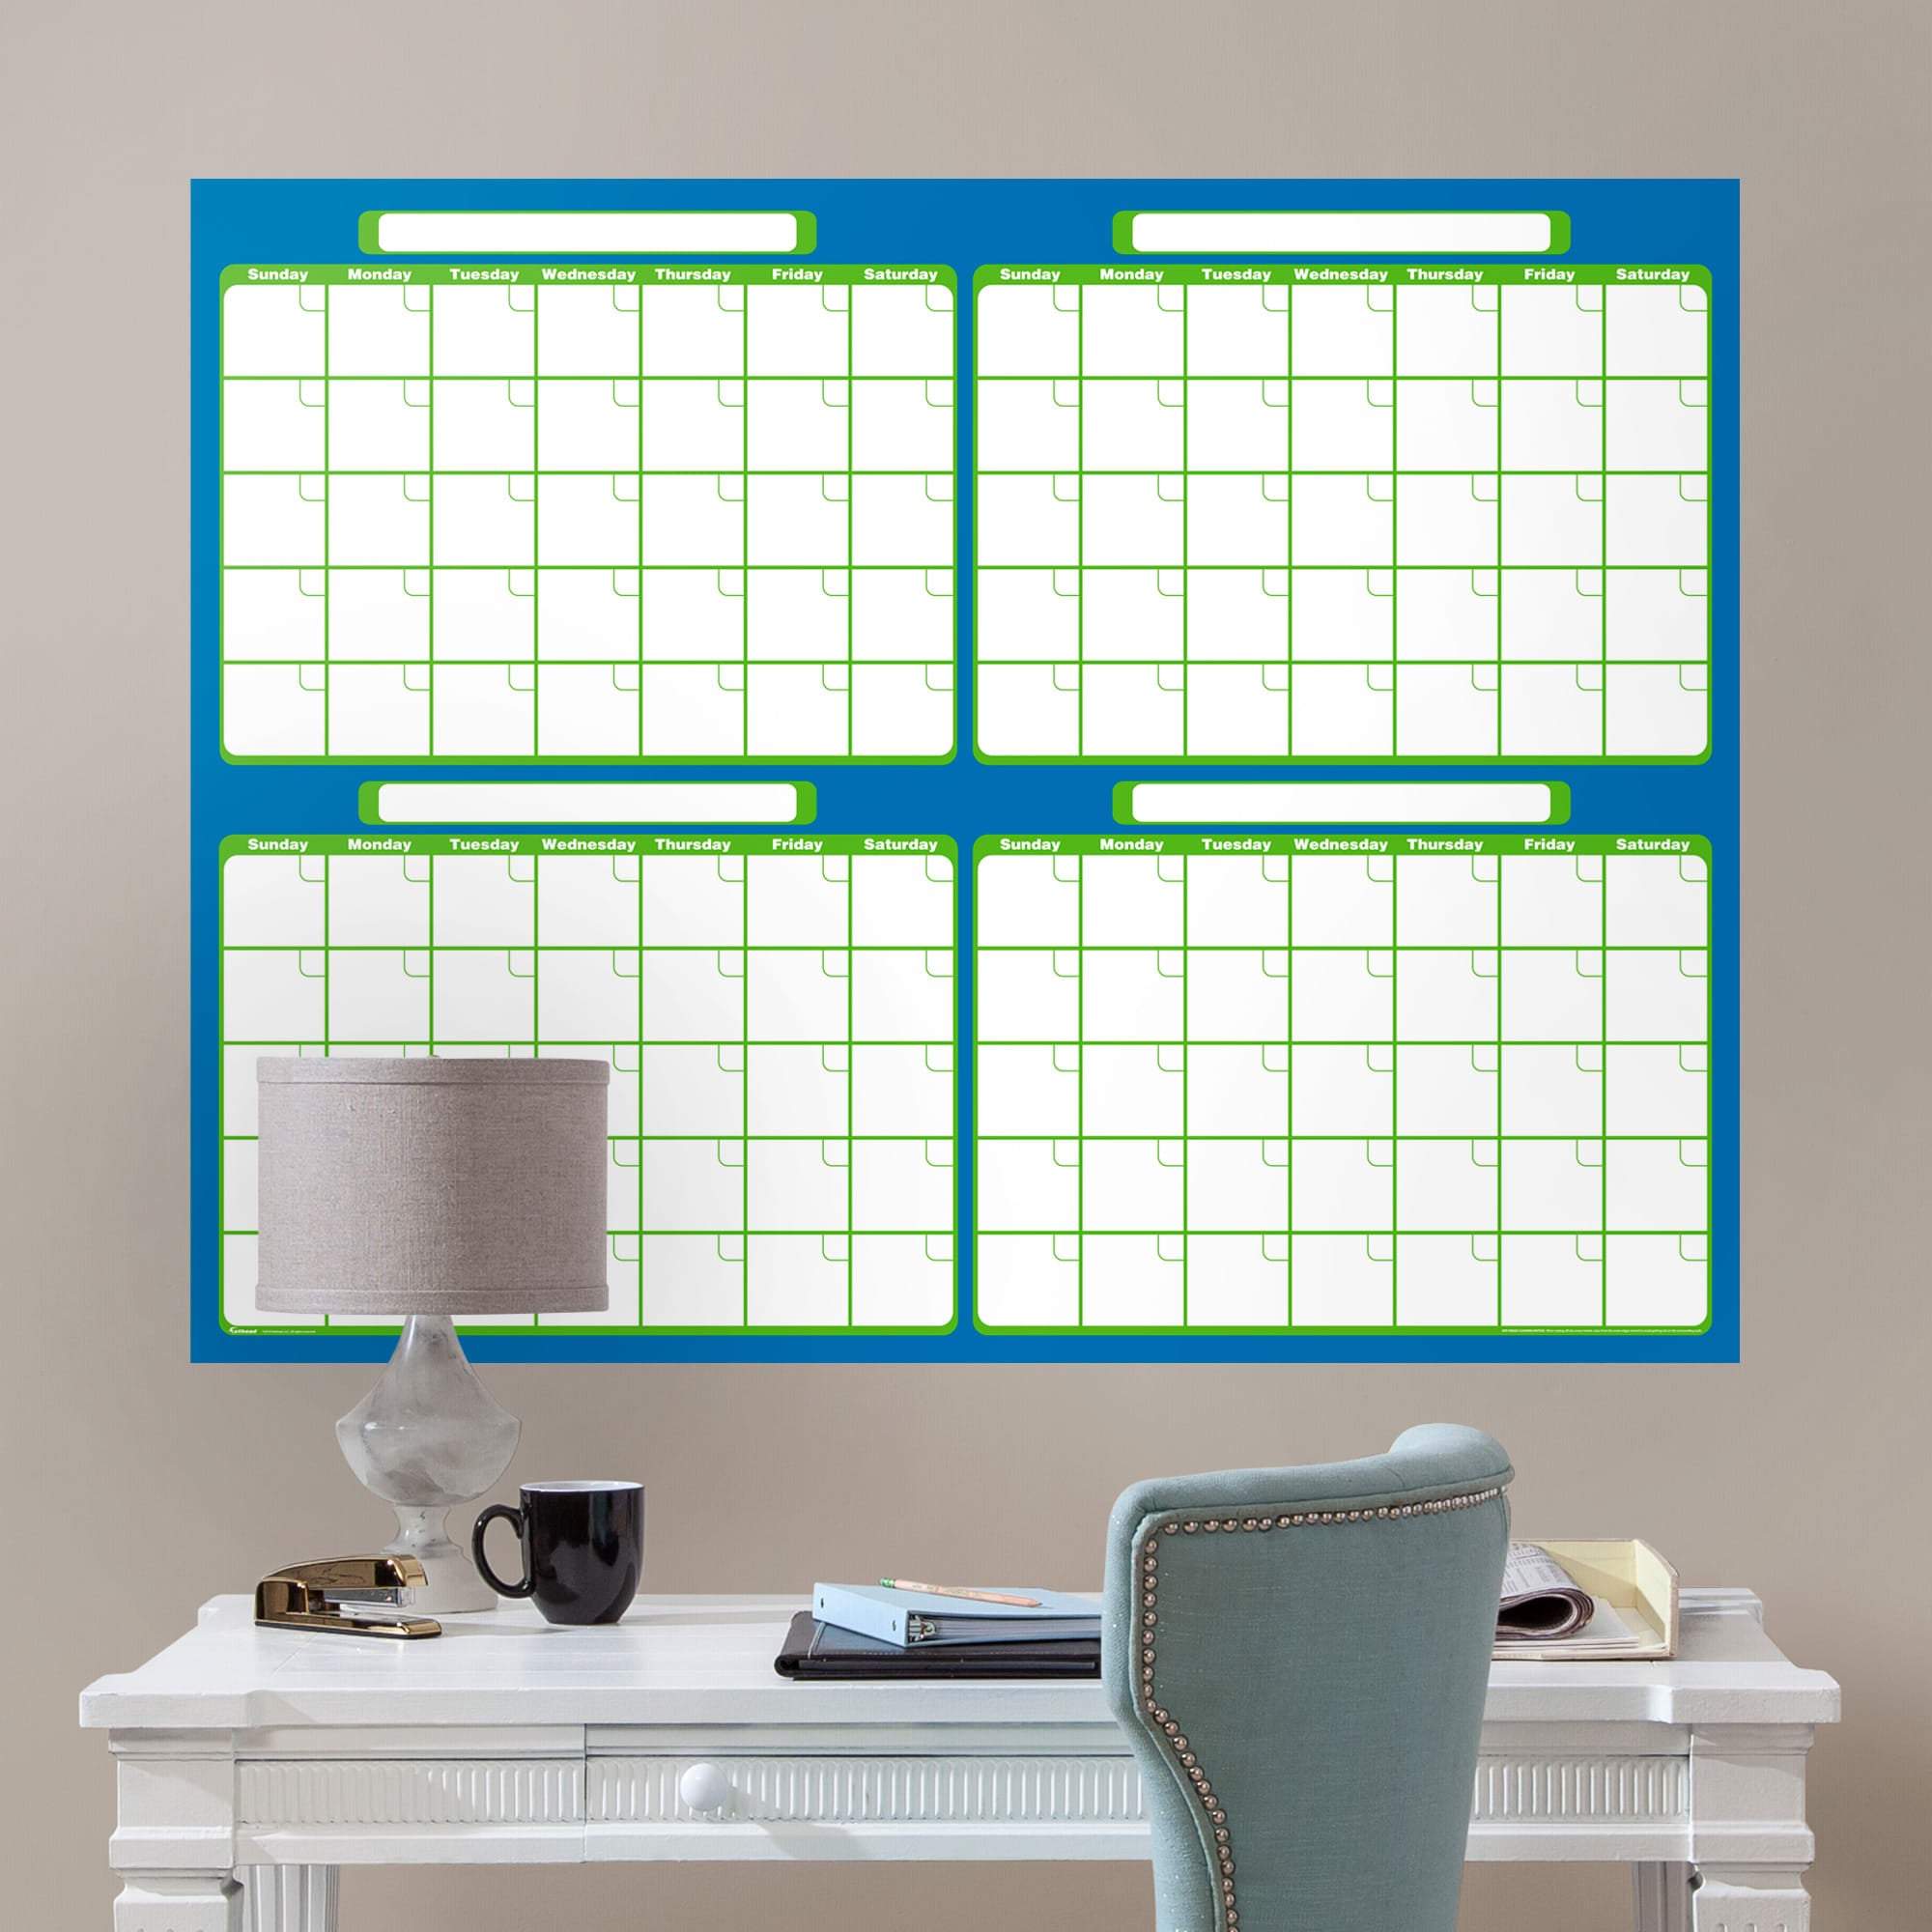 Four Month Calendar - Removable Dry Erase Vinyl Decal in Royal Blue/Green (52"Wx39.5"H) by Fathead